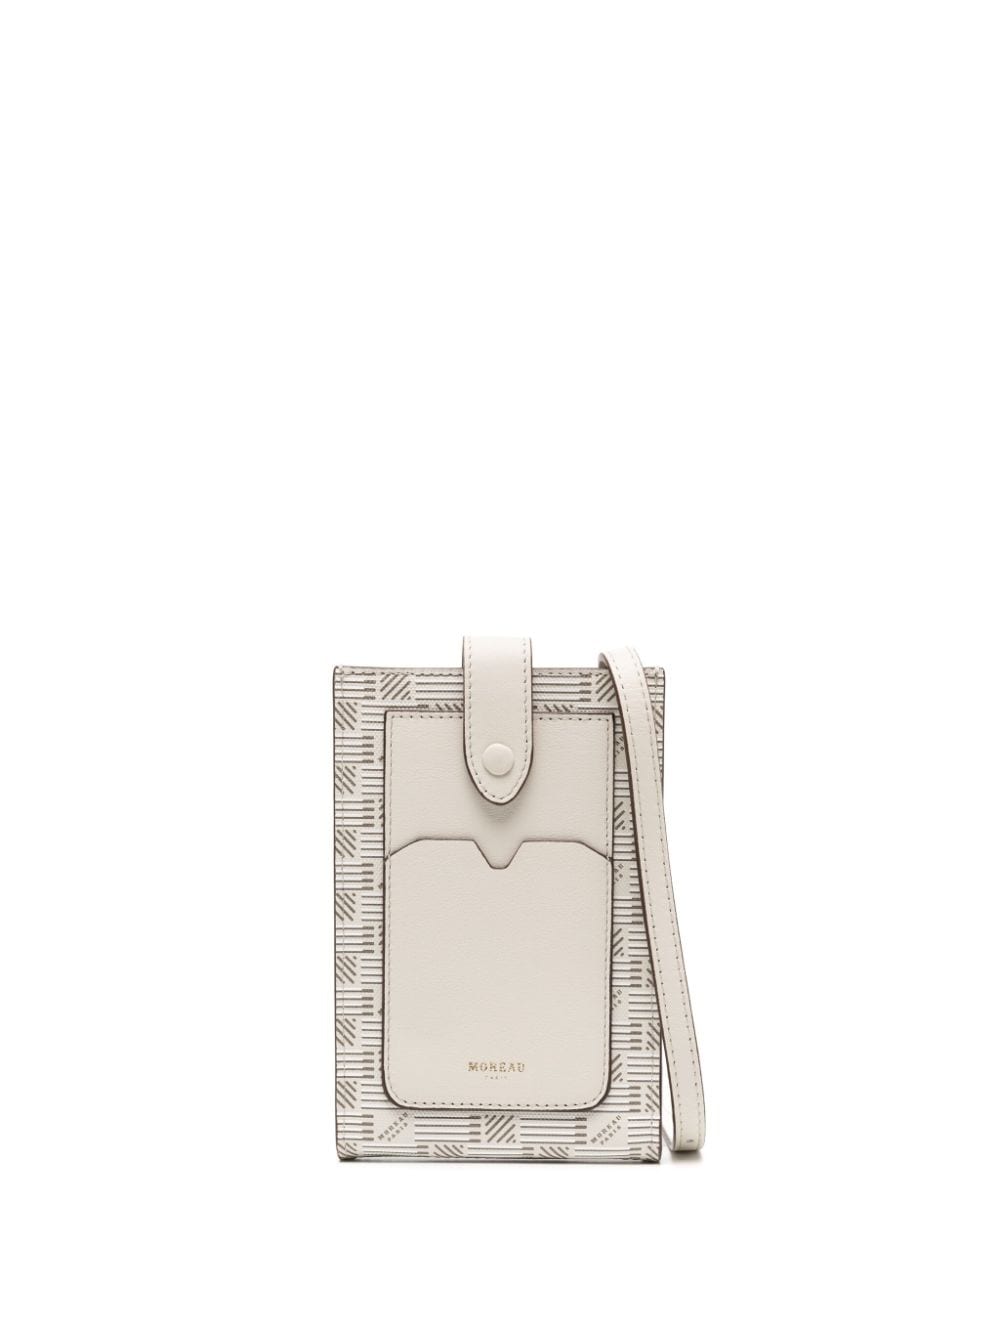 Moreau Phone Pouch Leather Bag In Neutrals